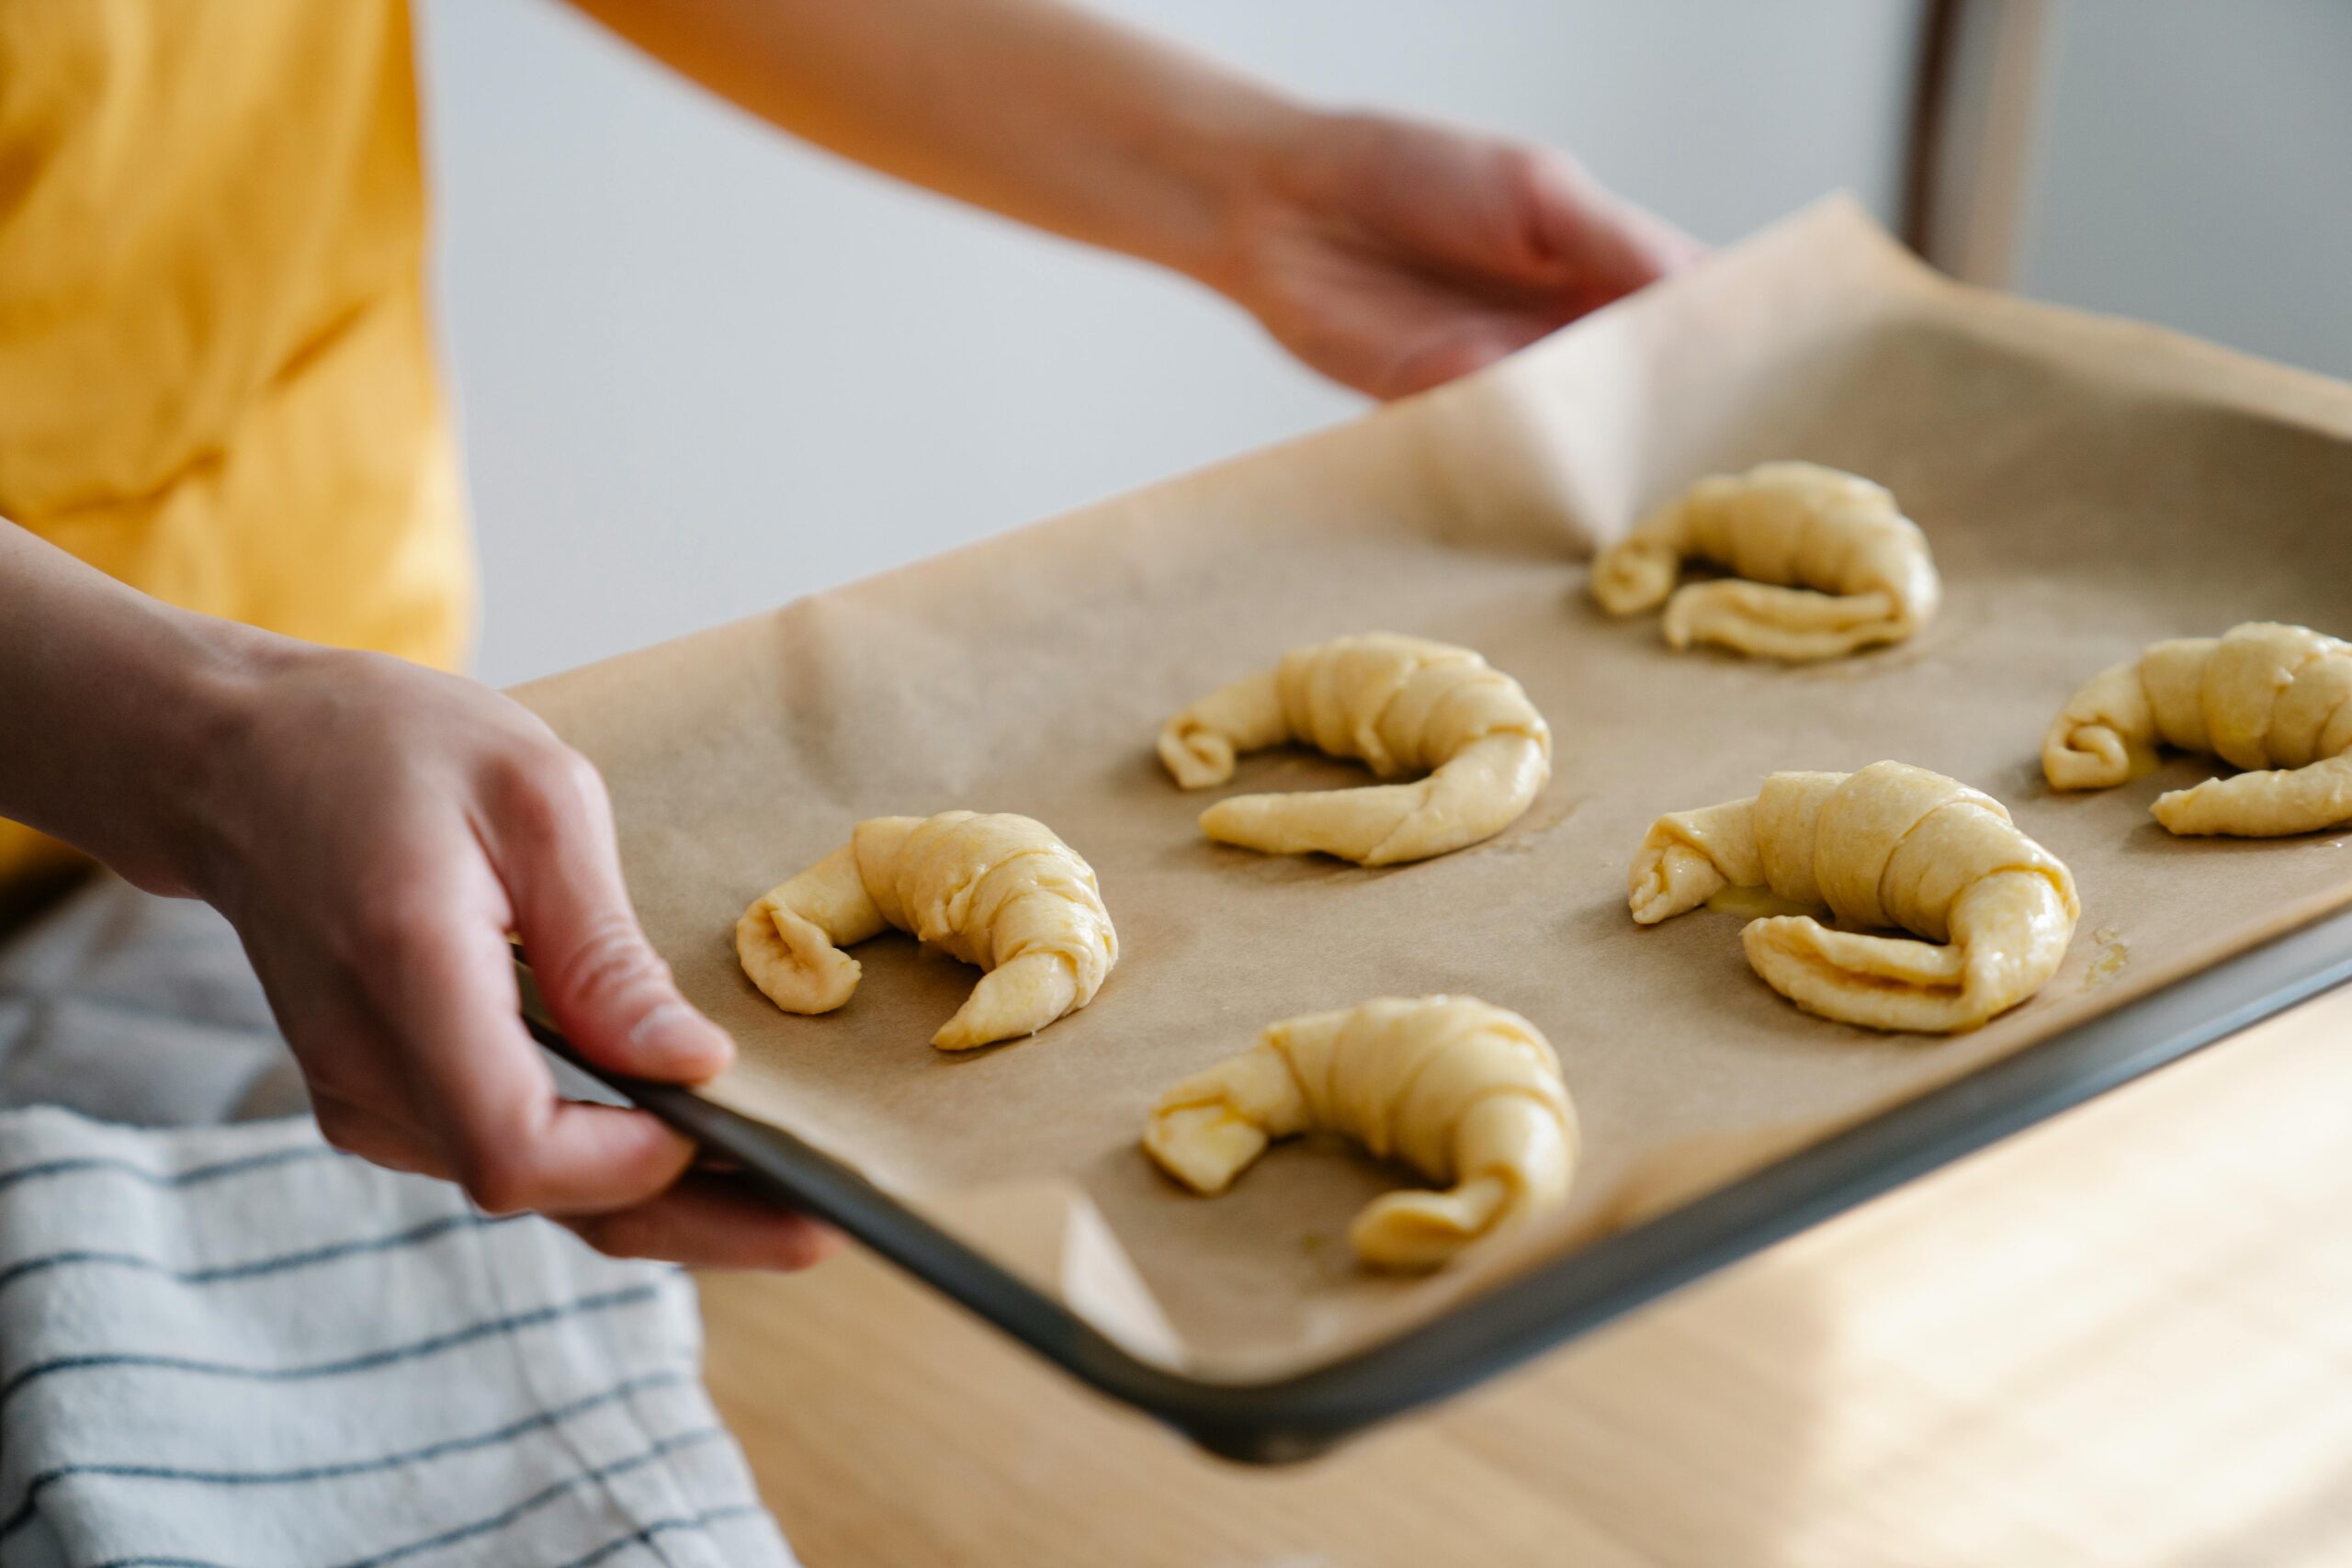 baking pan with unbaked croissants